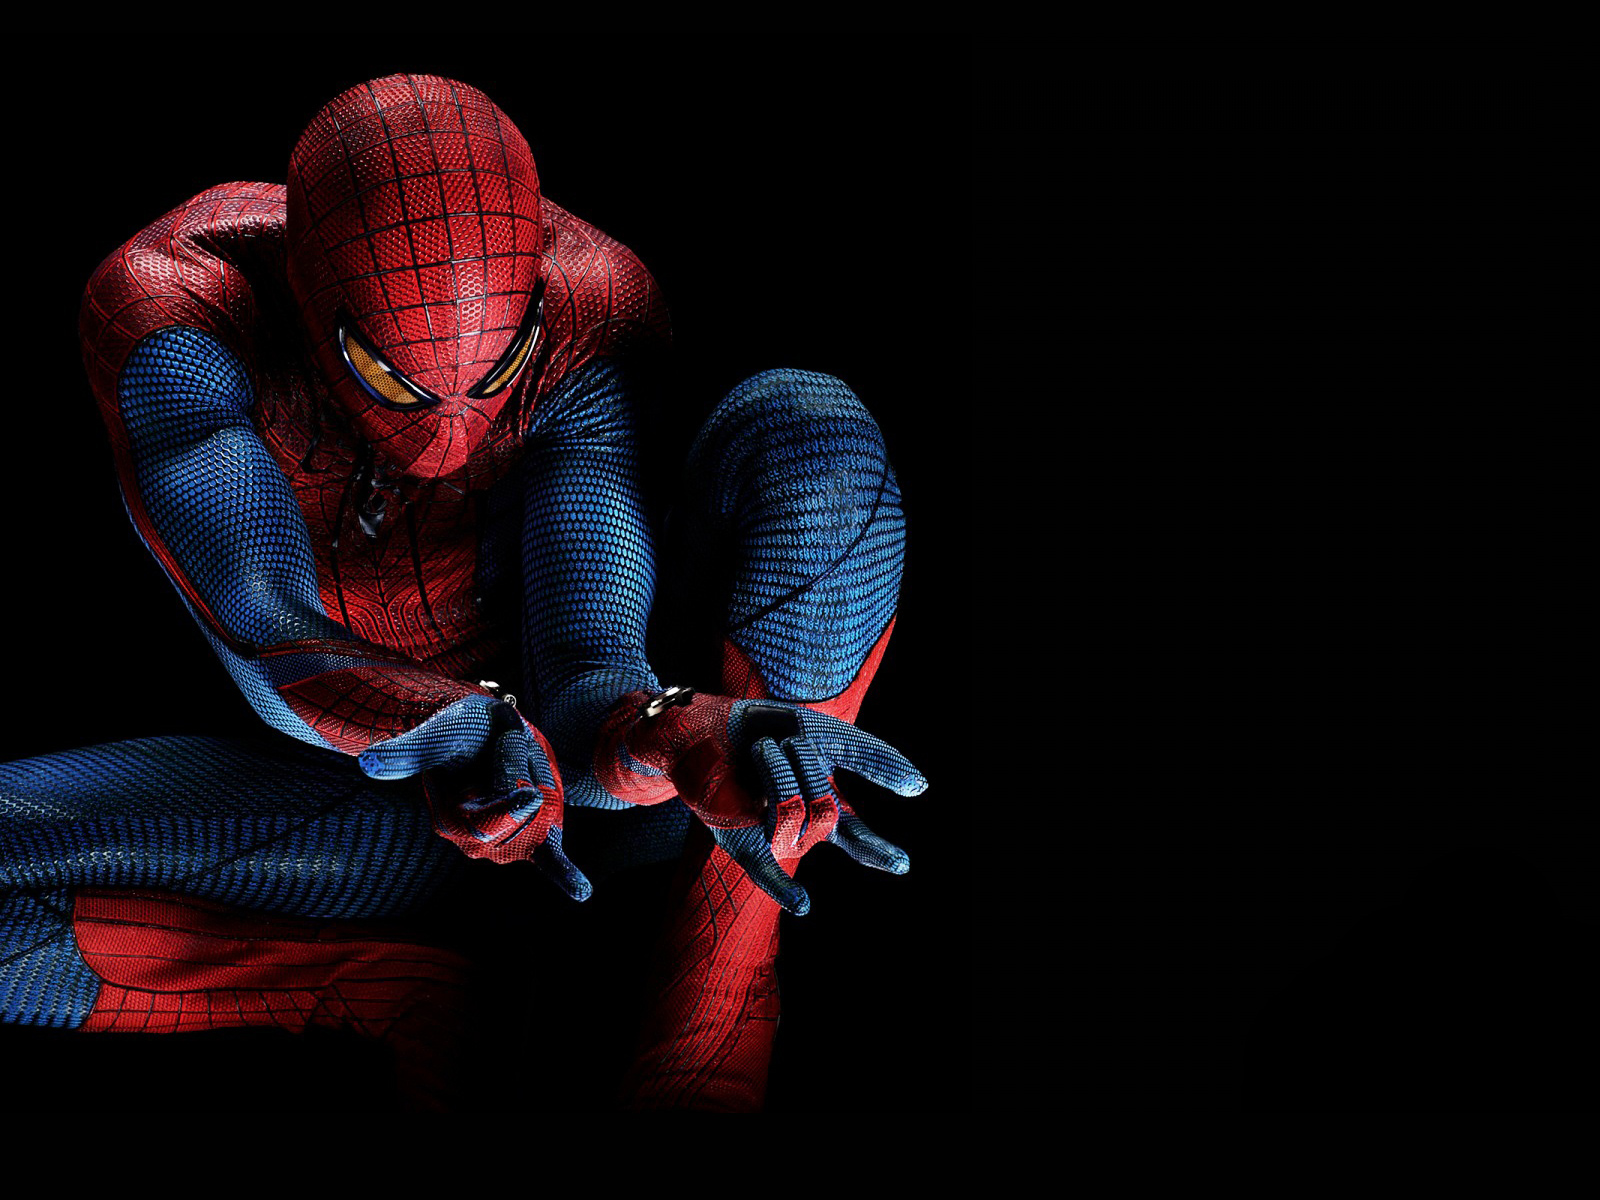 Spiderman 4 Wallpapers Free Download in HD